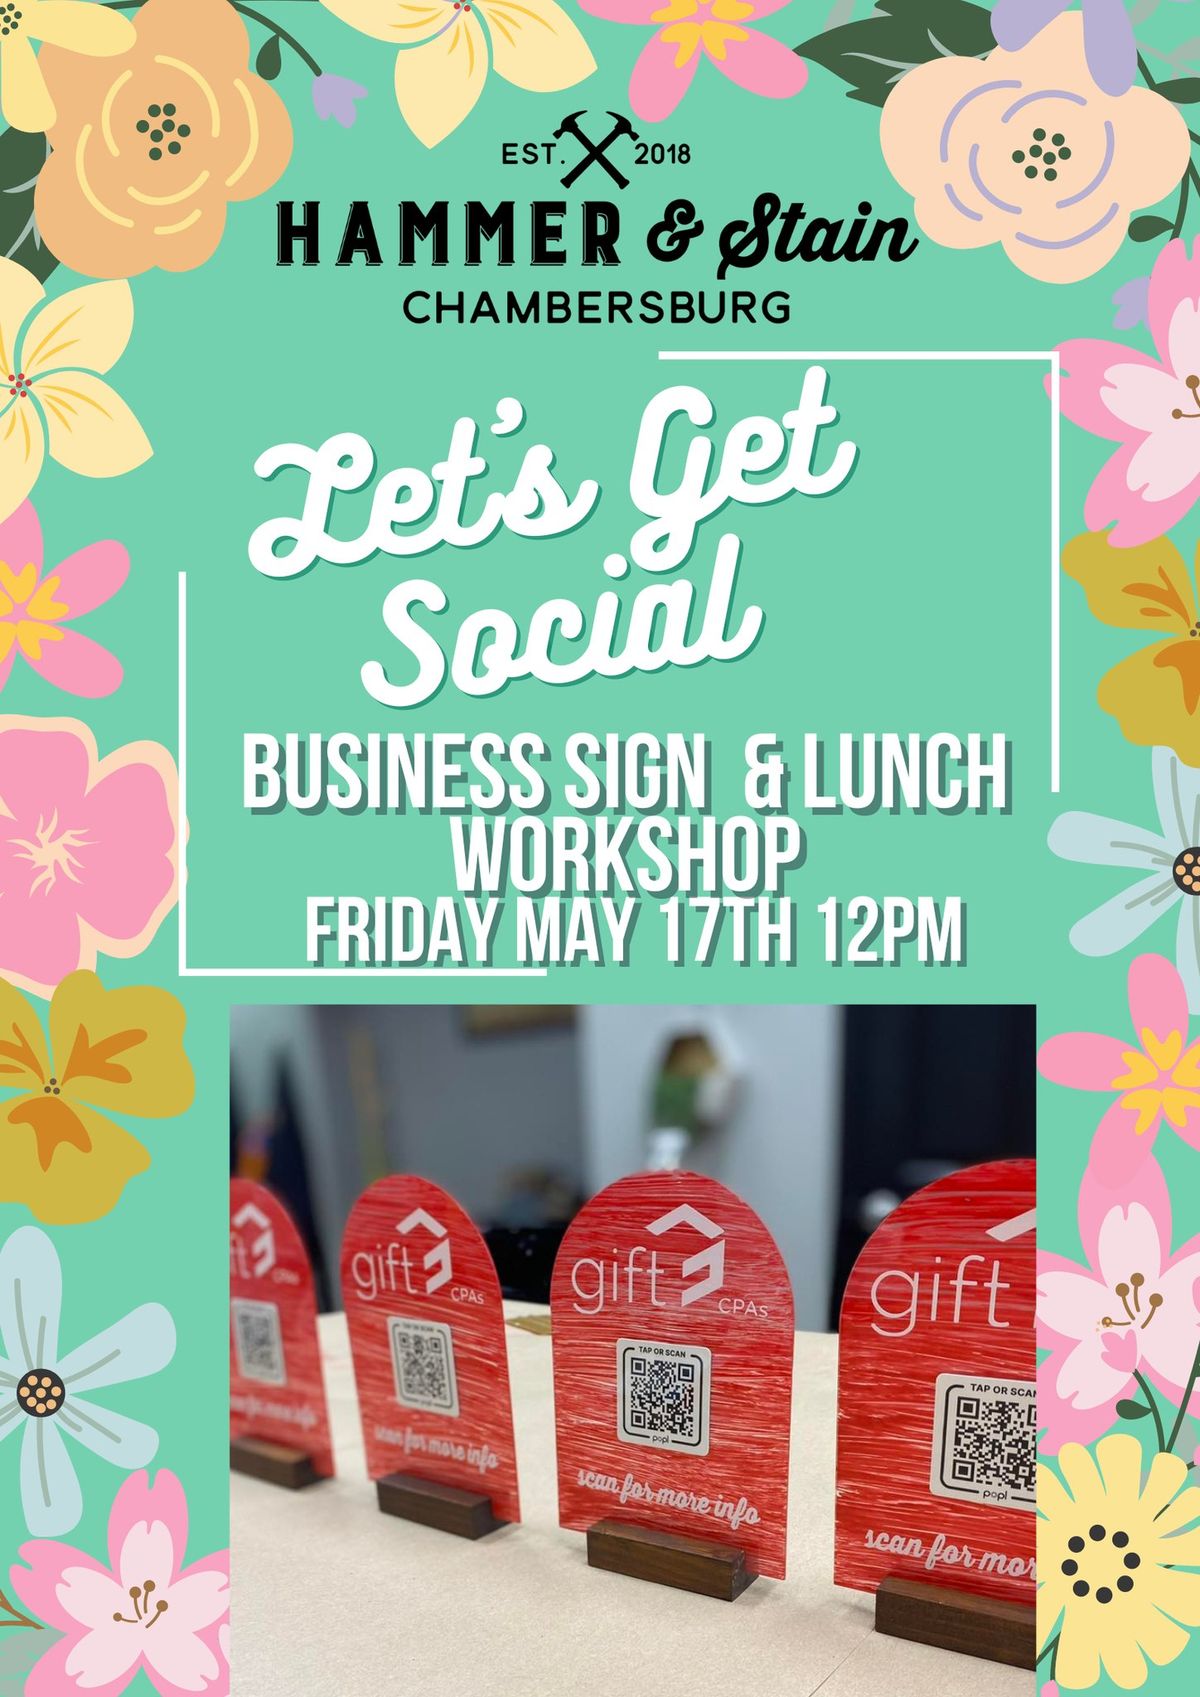 Friday May 17th- Let's get Social Business Sign & Lunch Workshop 12pm